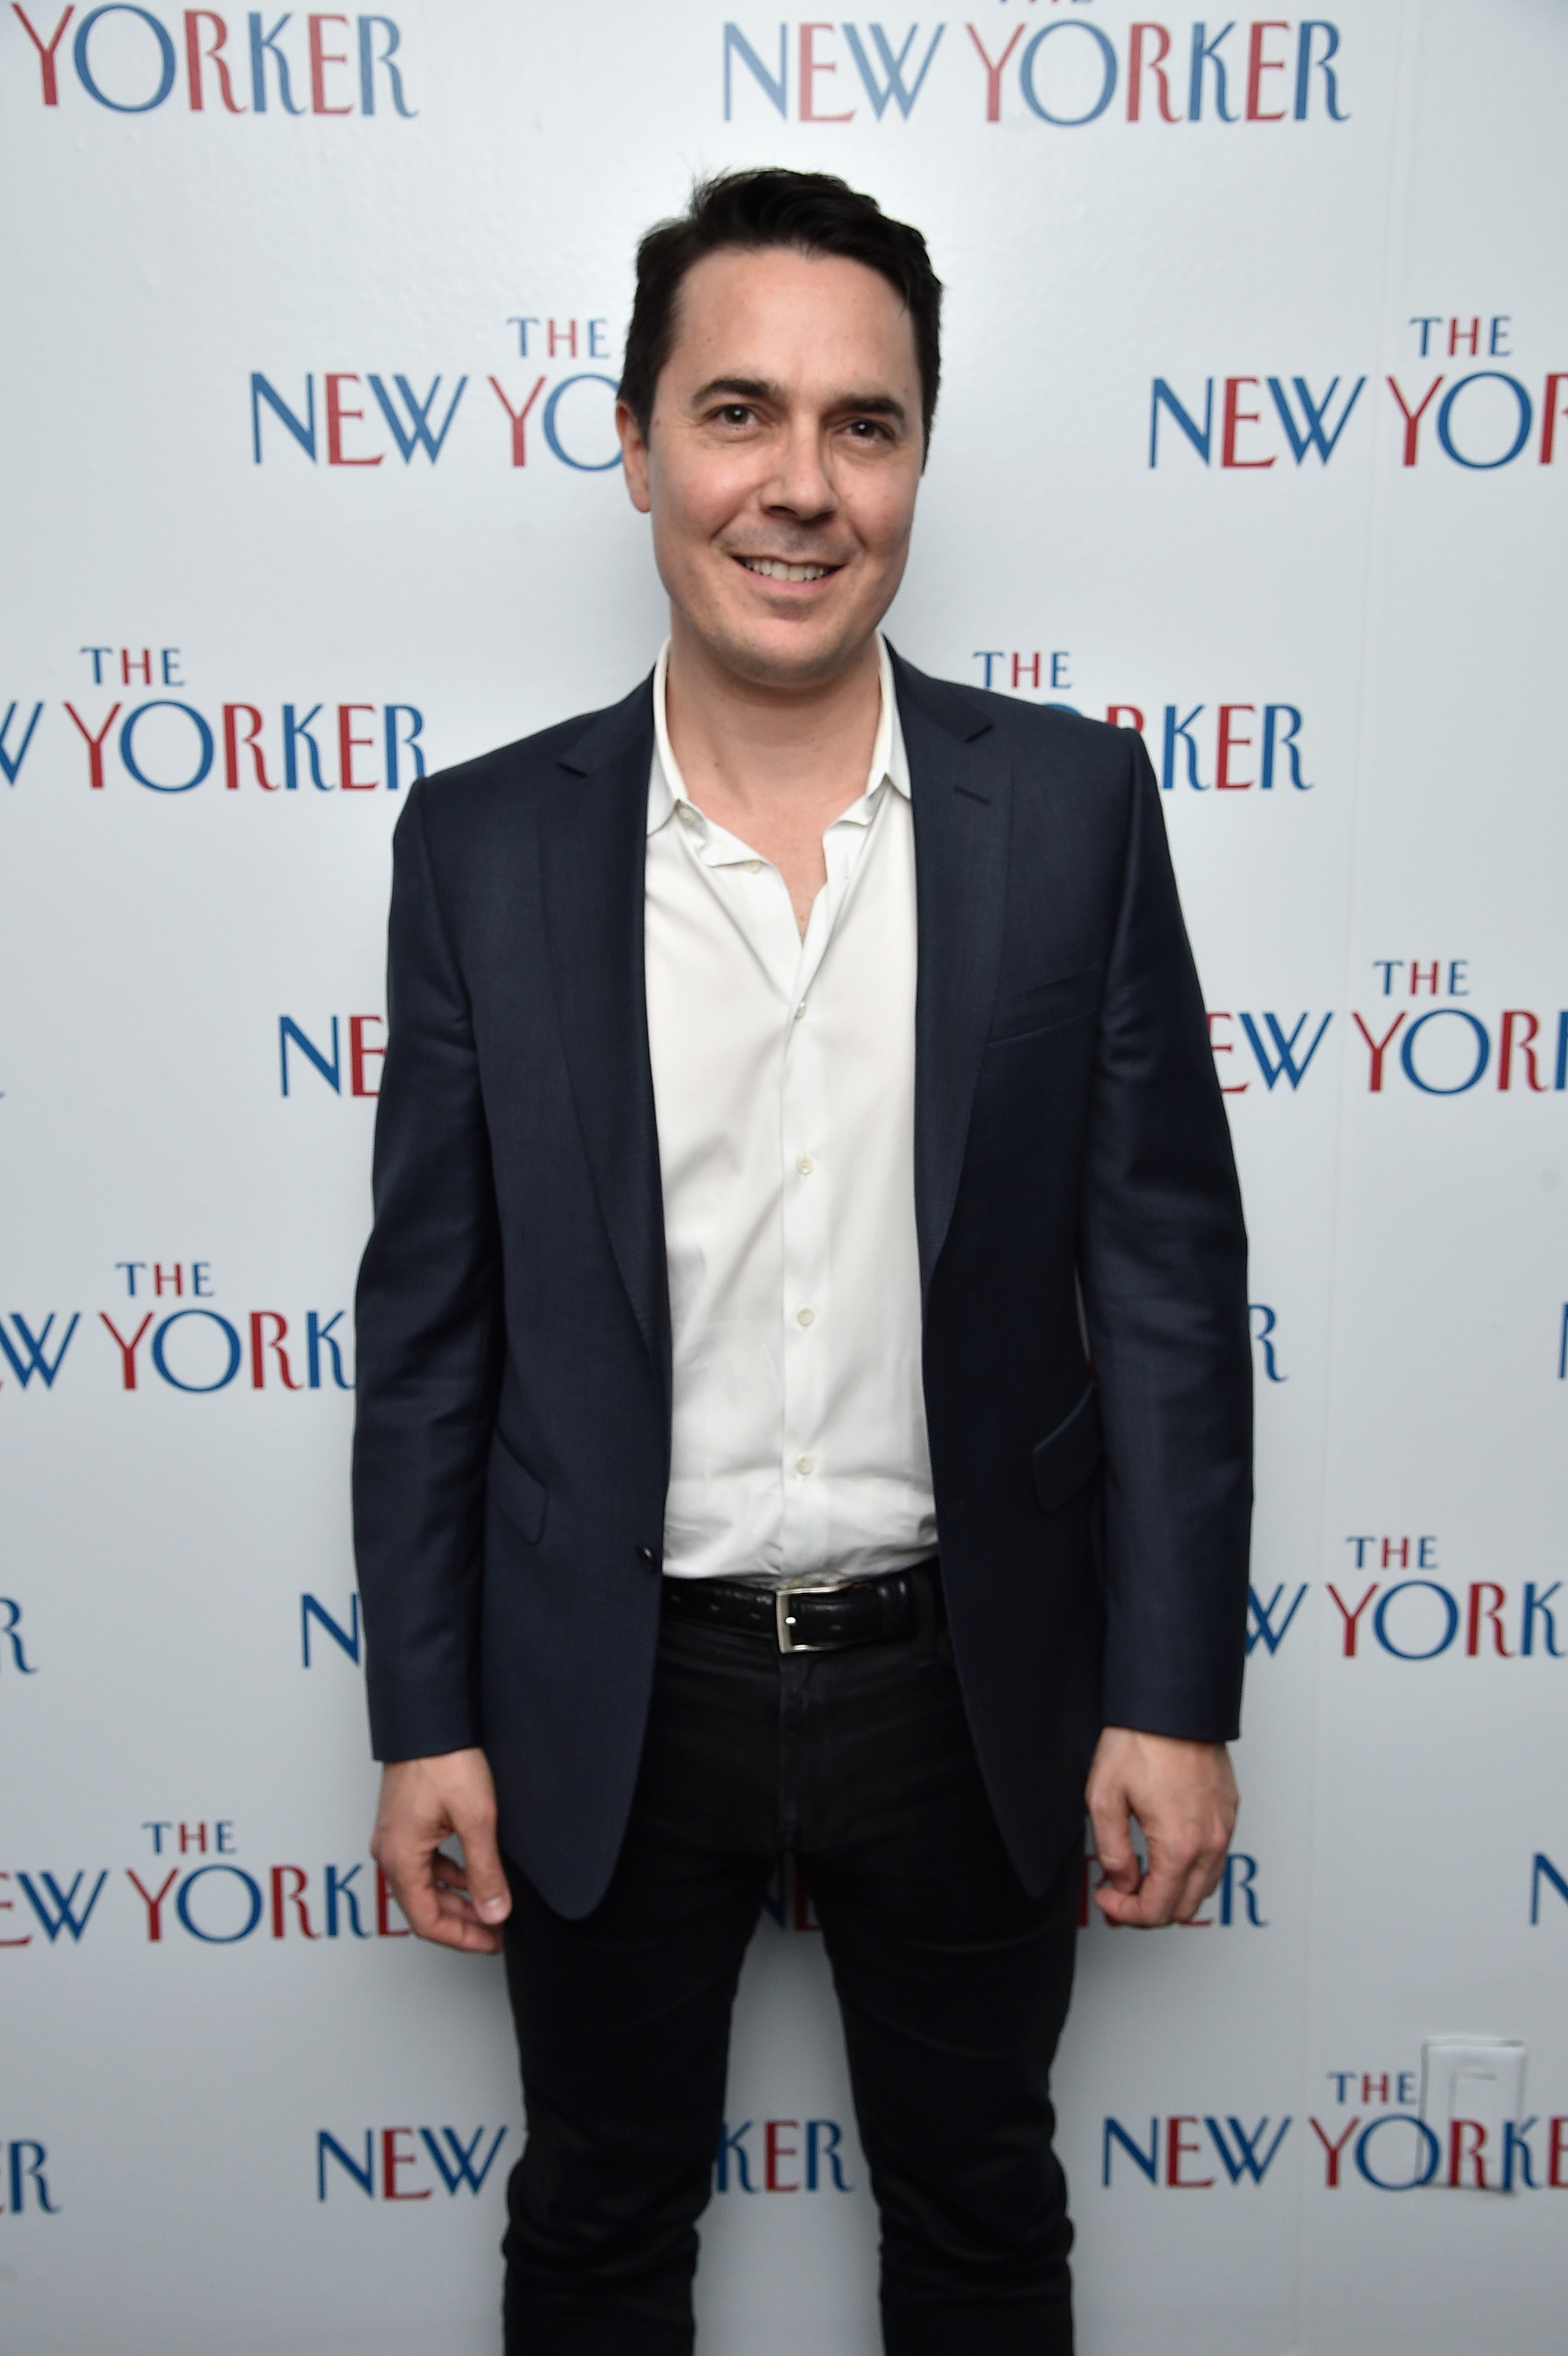 Washington correspondent for The New Yorker Ryan Lizza attends The New Yorker's annual party kicking off The White House Correspondents' Association Dinner Weekend on April 29, 2016 in Washington, DC. (Dimitrios Kambouris—Getty Images for The New Yorker)